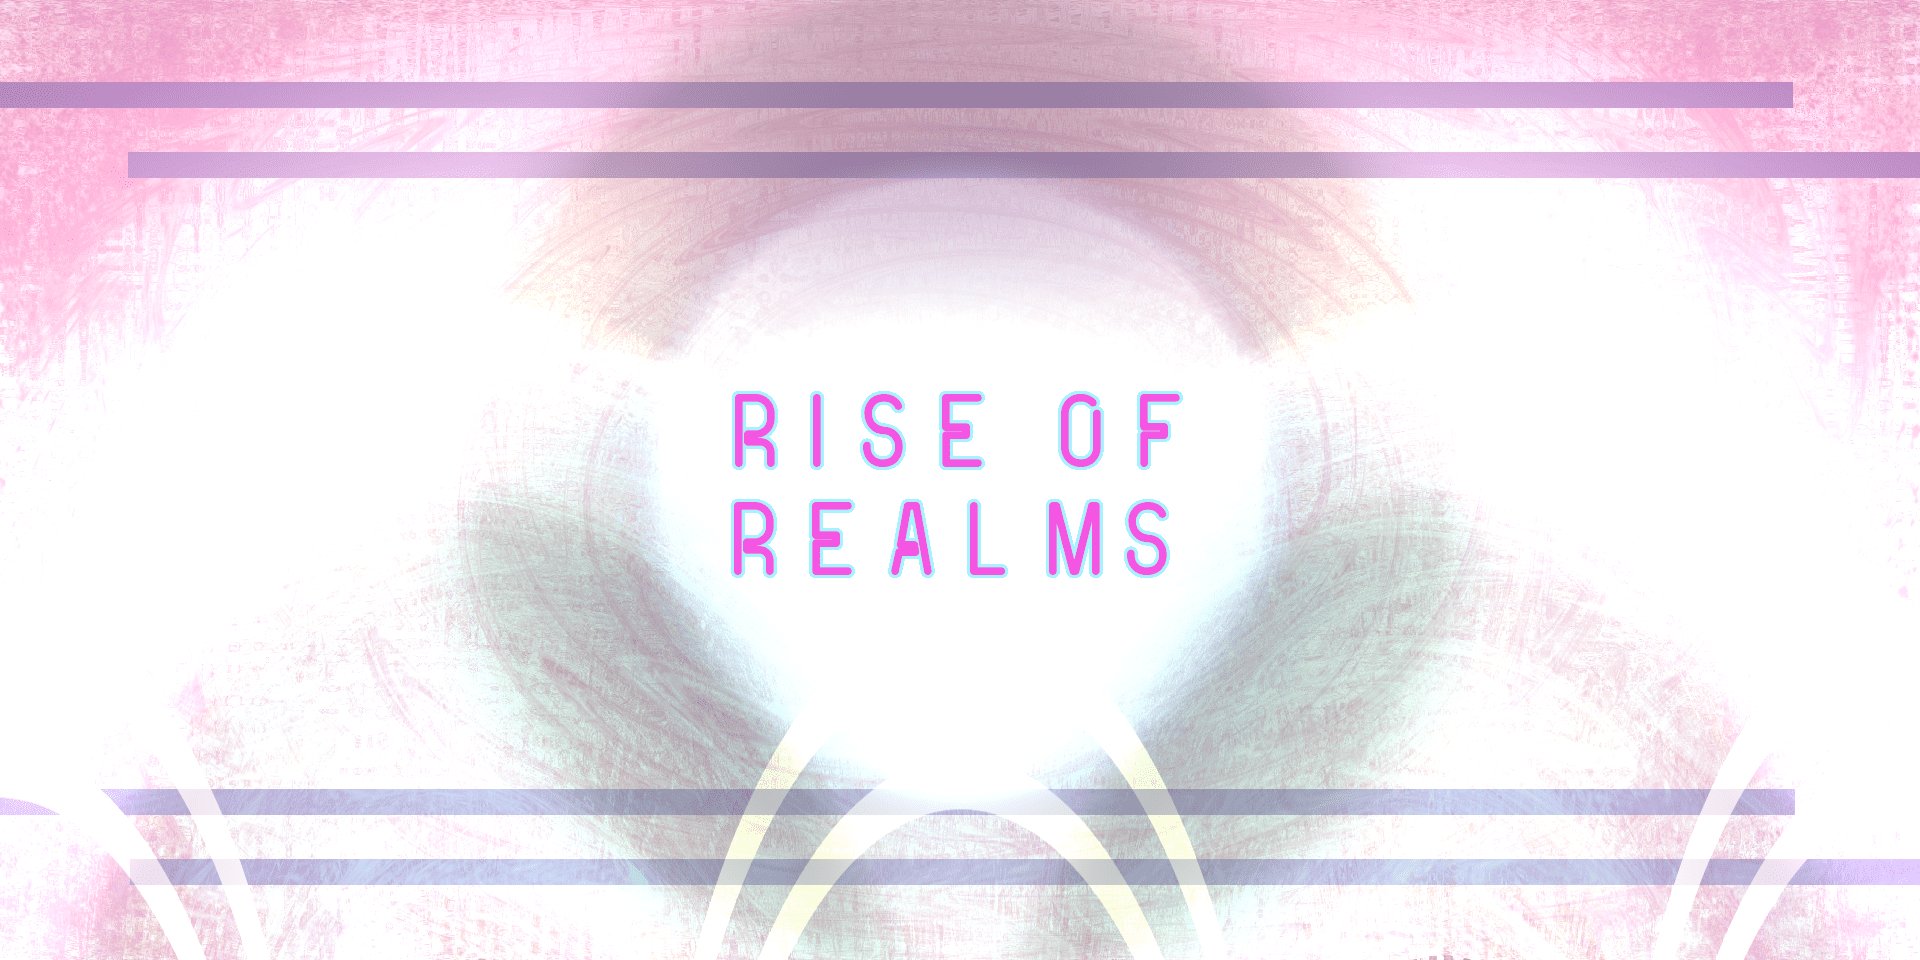 Realm walker Community: rise of realms